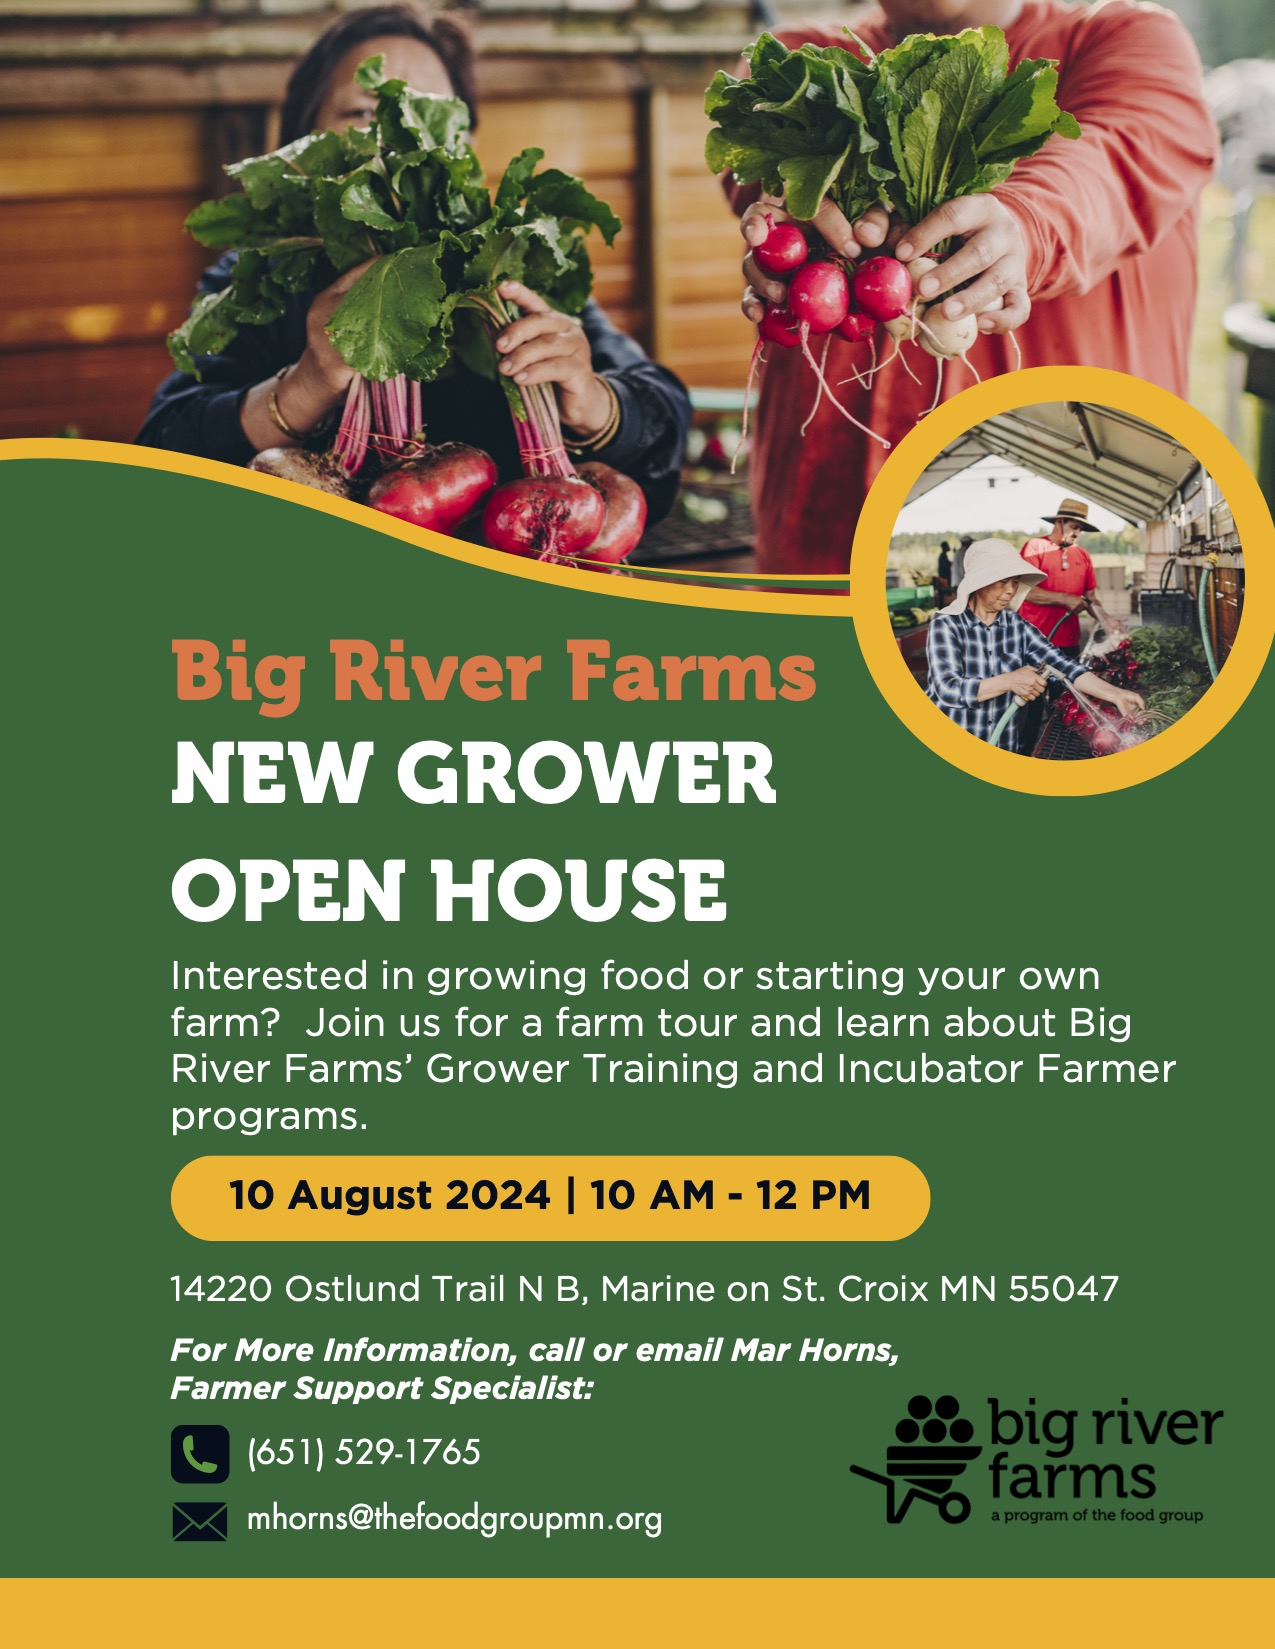 Big River Farms: New Grower Open House